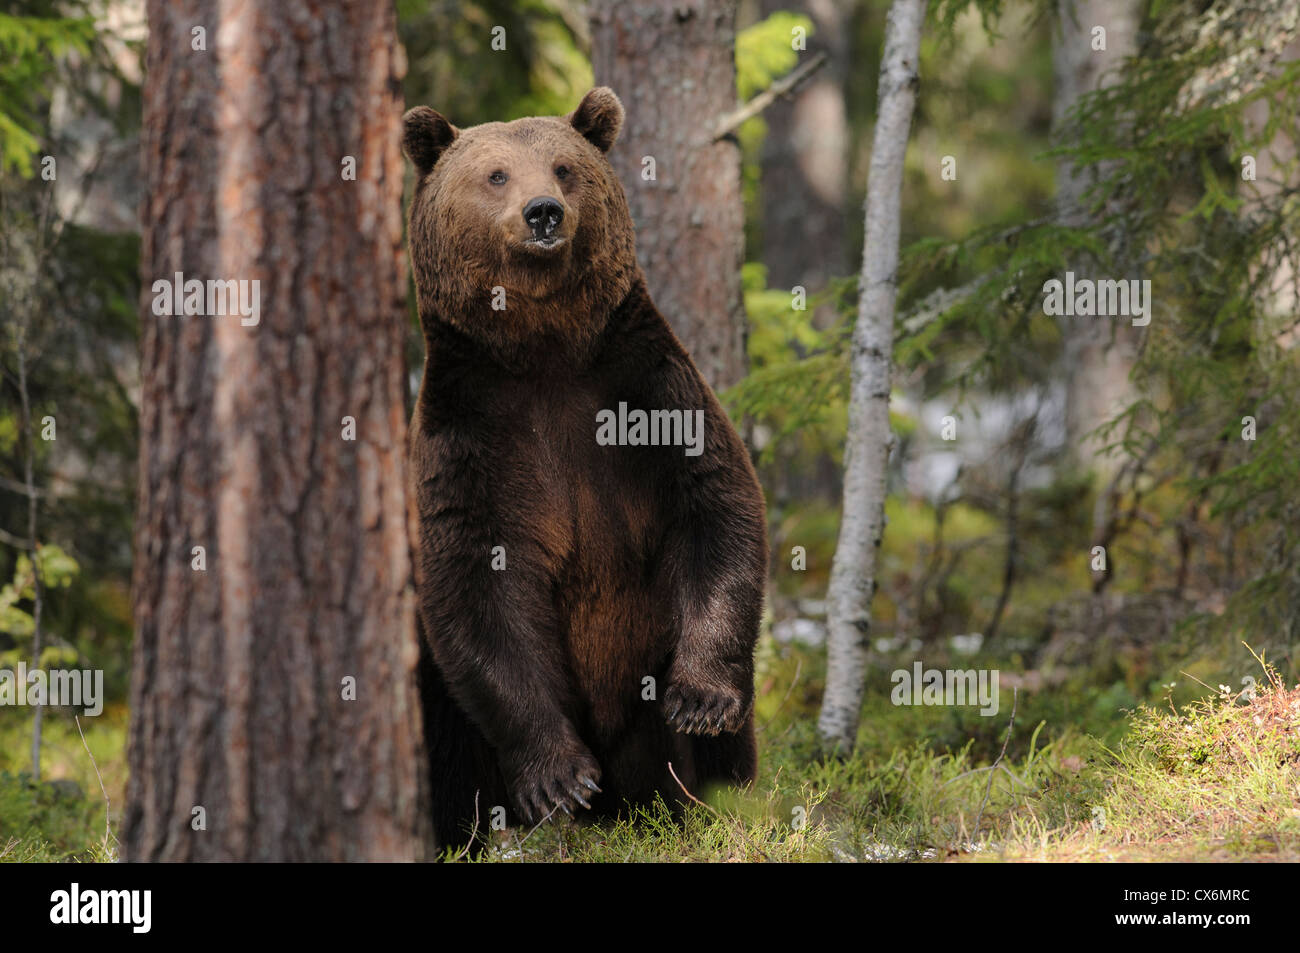 Wild brown bear standing up in a forest in eastern Finland Stock Photo